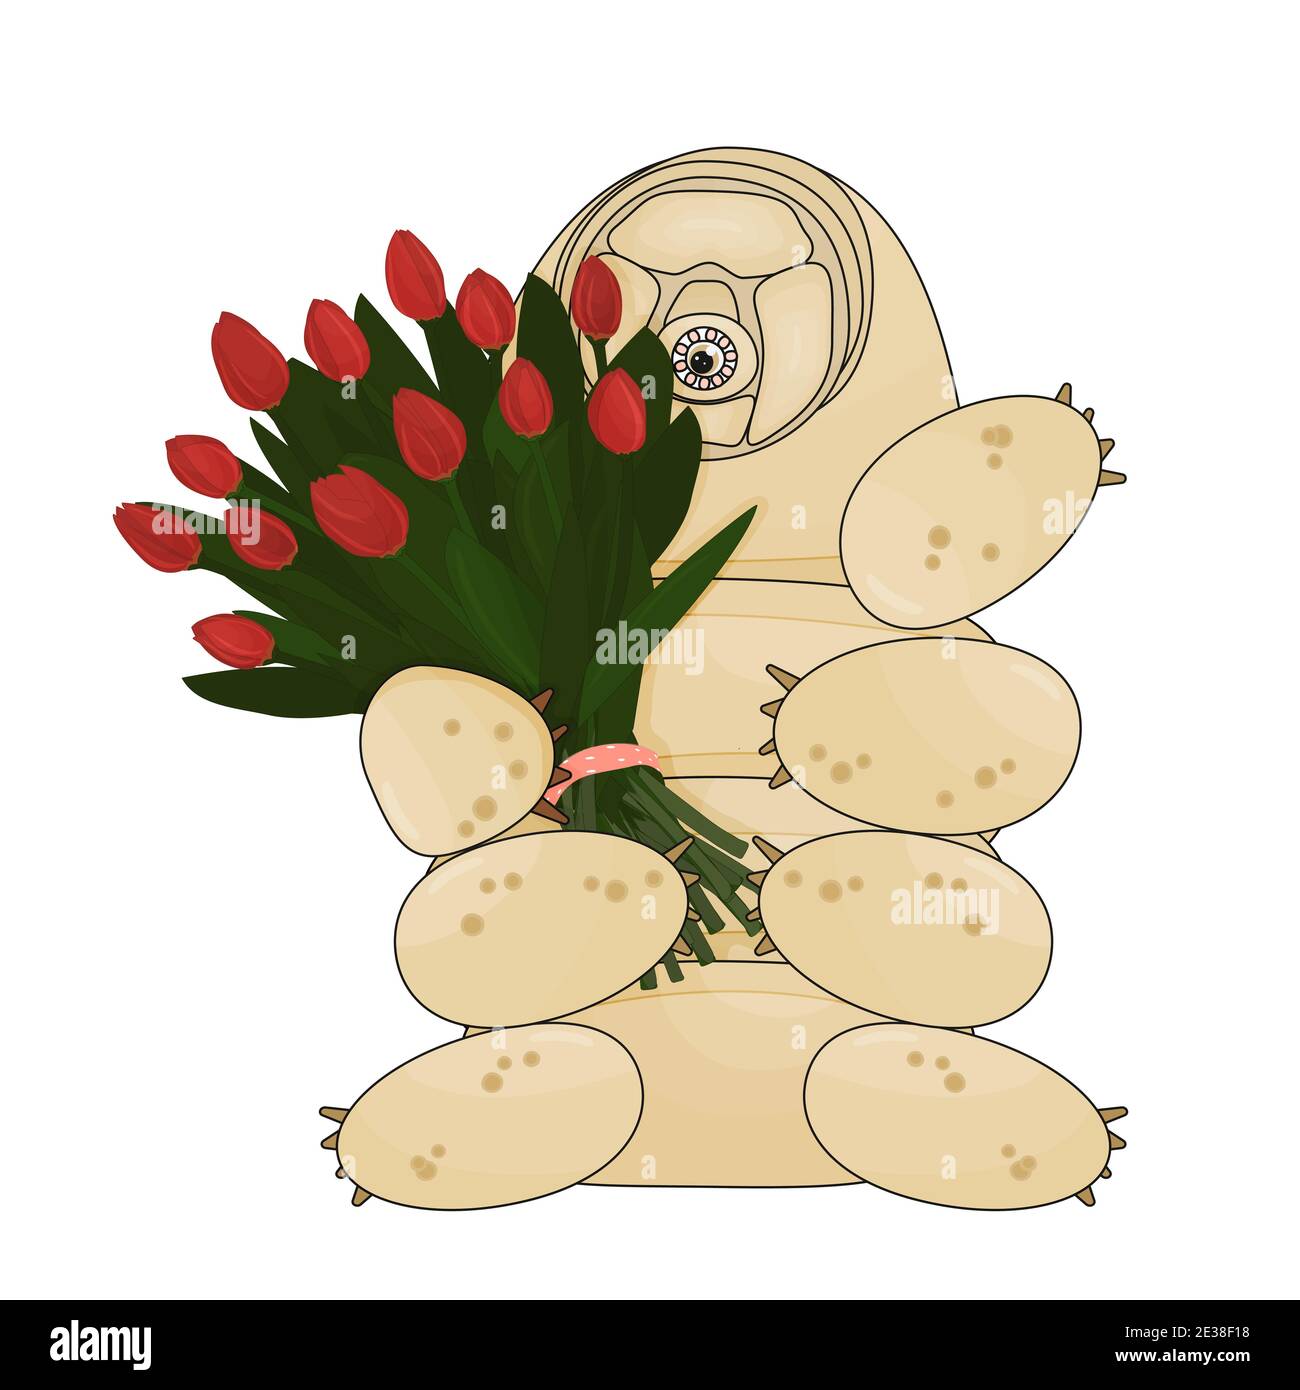 The beige cute tardigrade holds a bouquet of red tulips, which consists of thirteen flowers. Gift is tied with pink polka dot ribbon. Animal is isolat Stock Vector